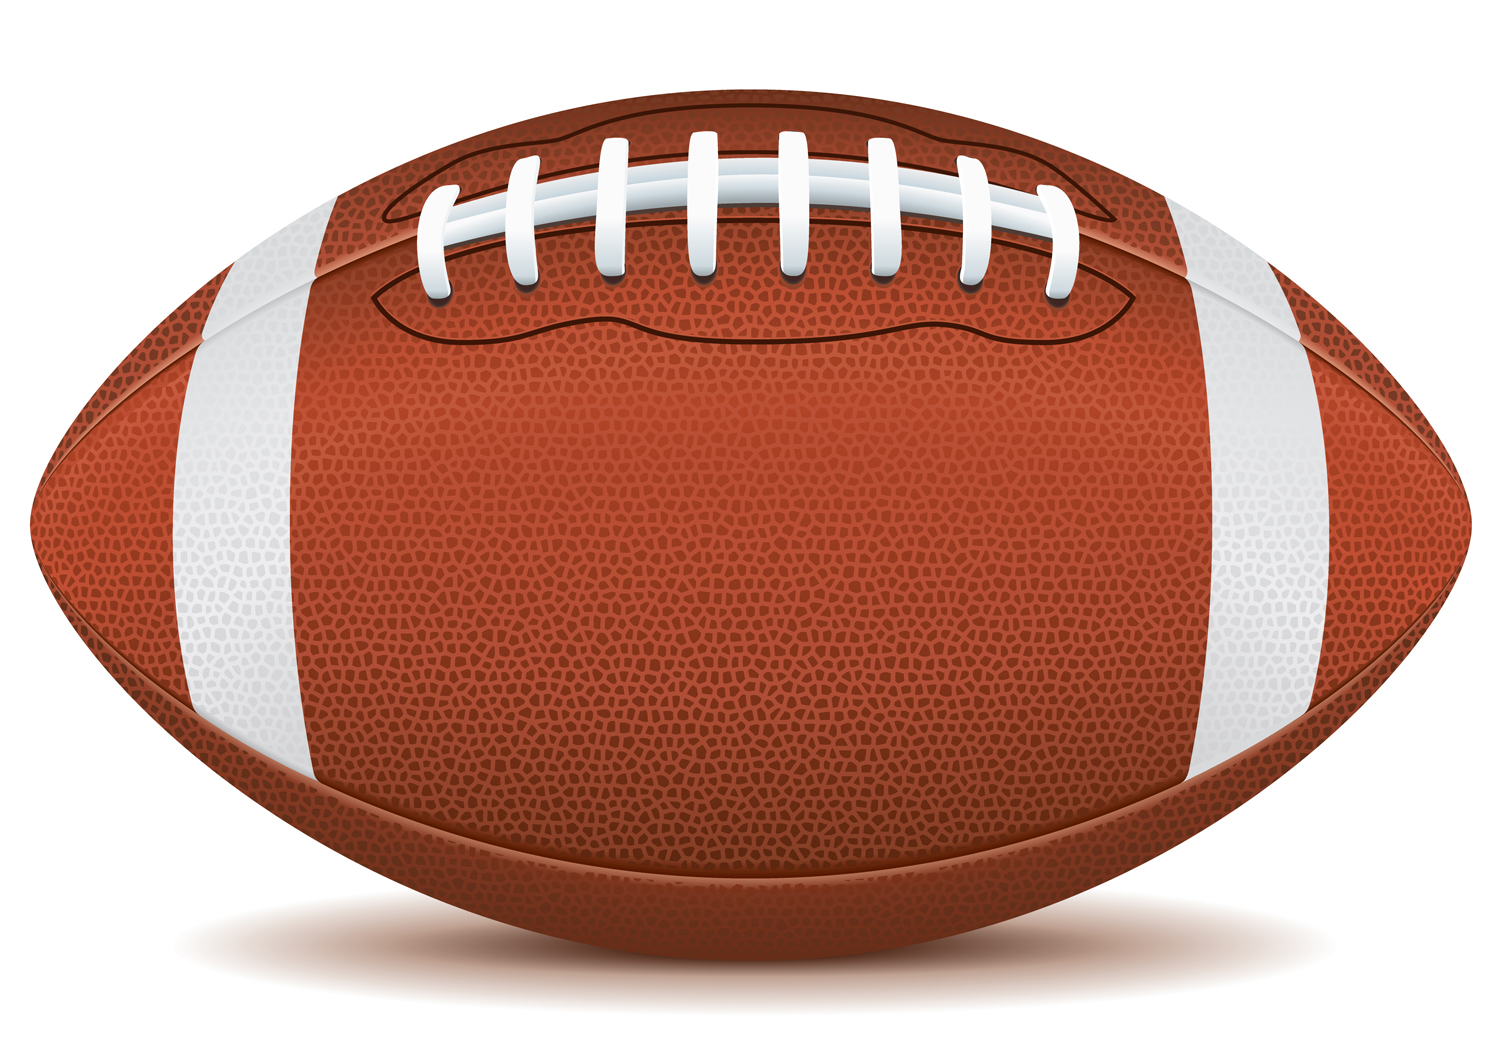 Football  Free Images at Clker.com  vector clip art online, royalty 